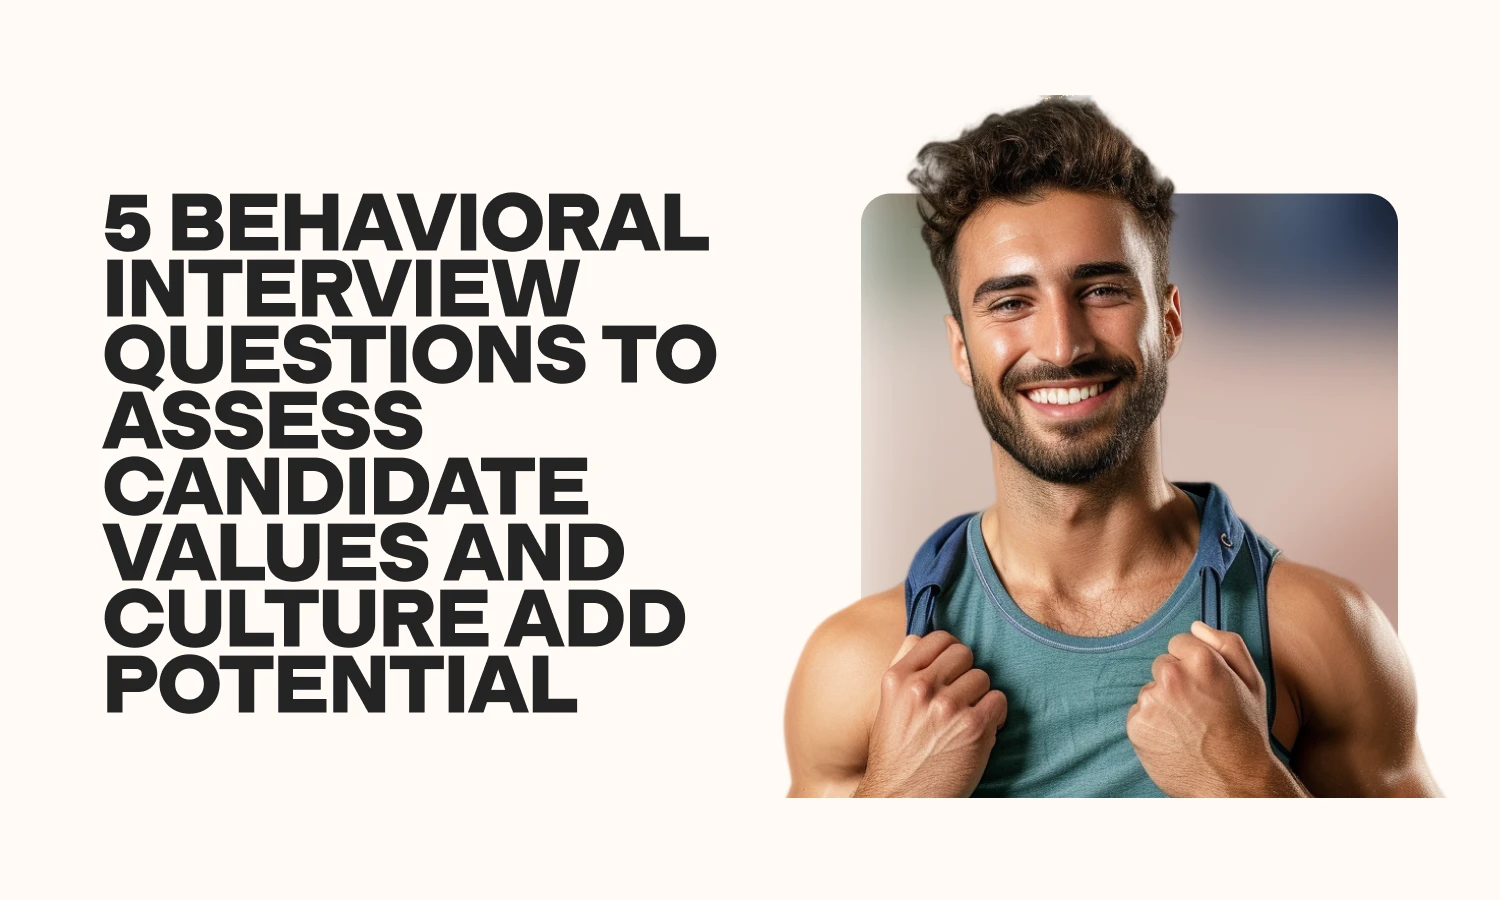 behavioral interview questions to assess candidate values and culture add potential